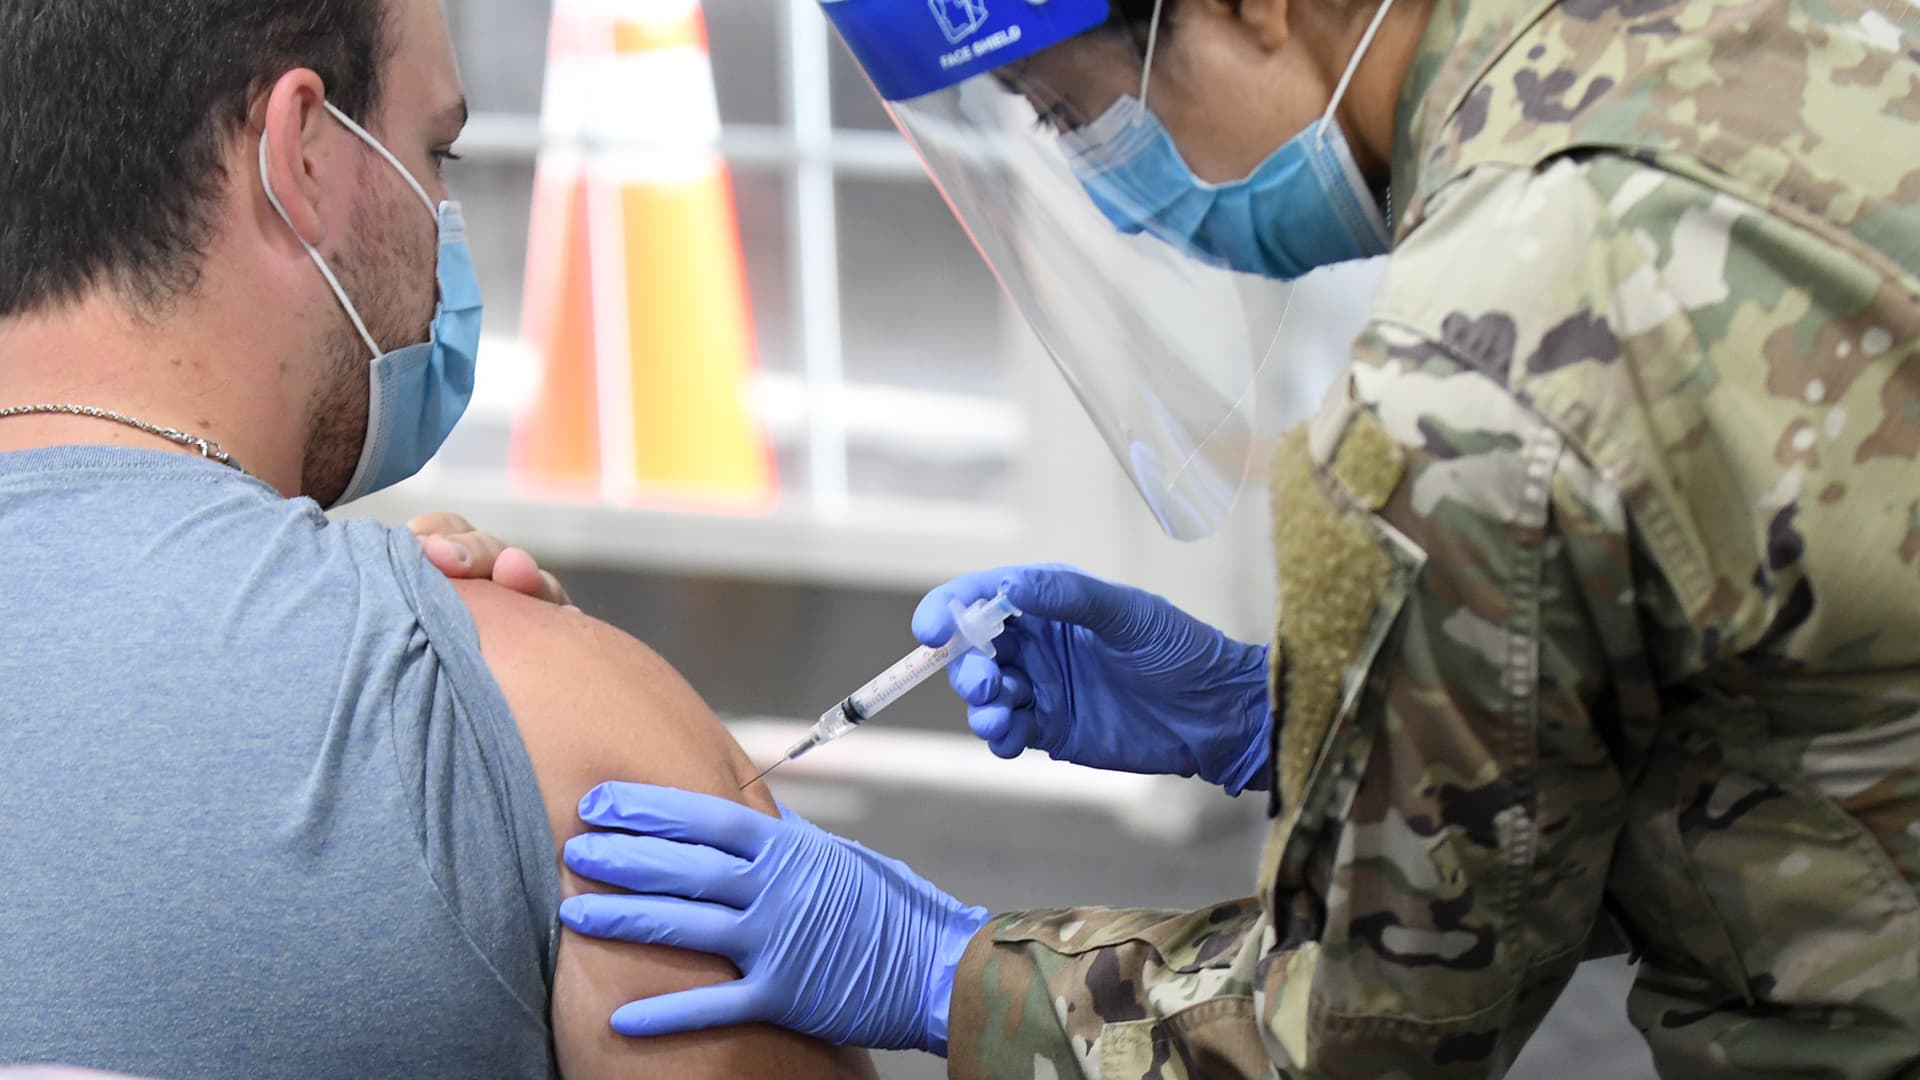 A man receives a shot at the FEMA-supported COVID-19 vaccination site at Valencia State College on the first day the site resumed offering the Johnson & Johnson vaccine following the lifting of the pause ordered by the FDA and the CDC due to blood clot concerns.